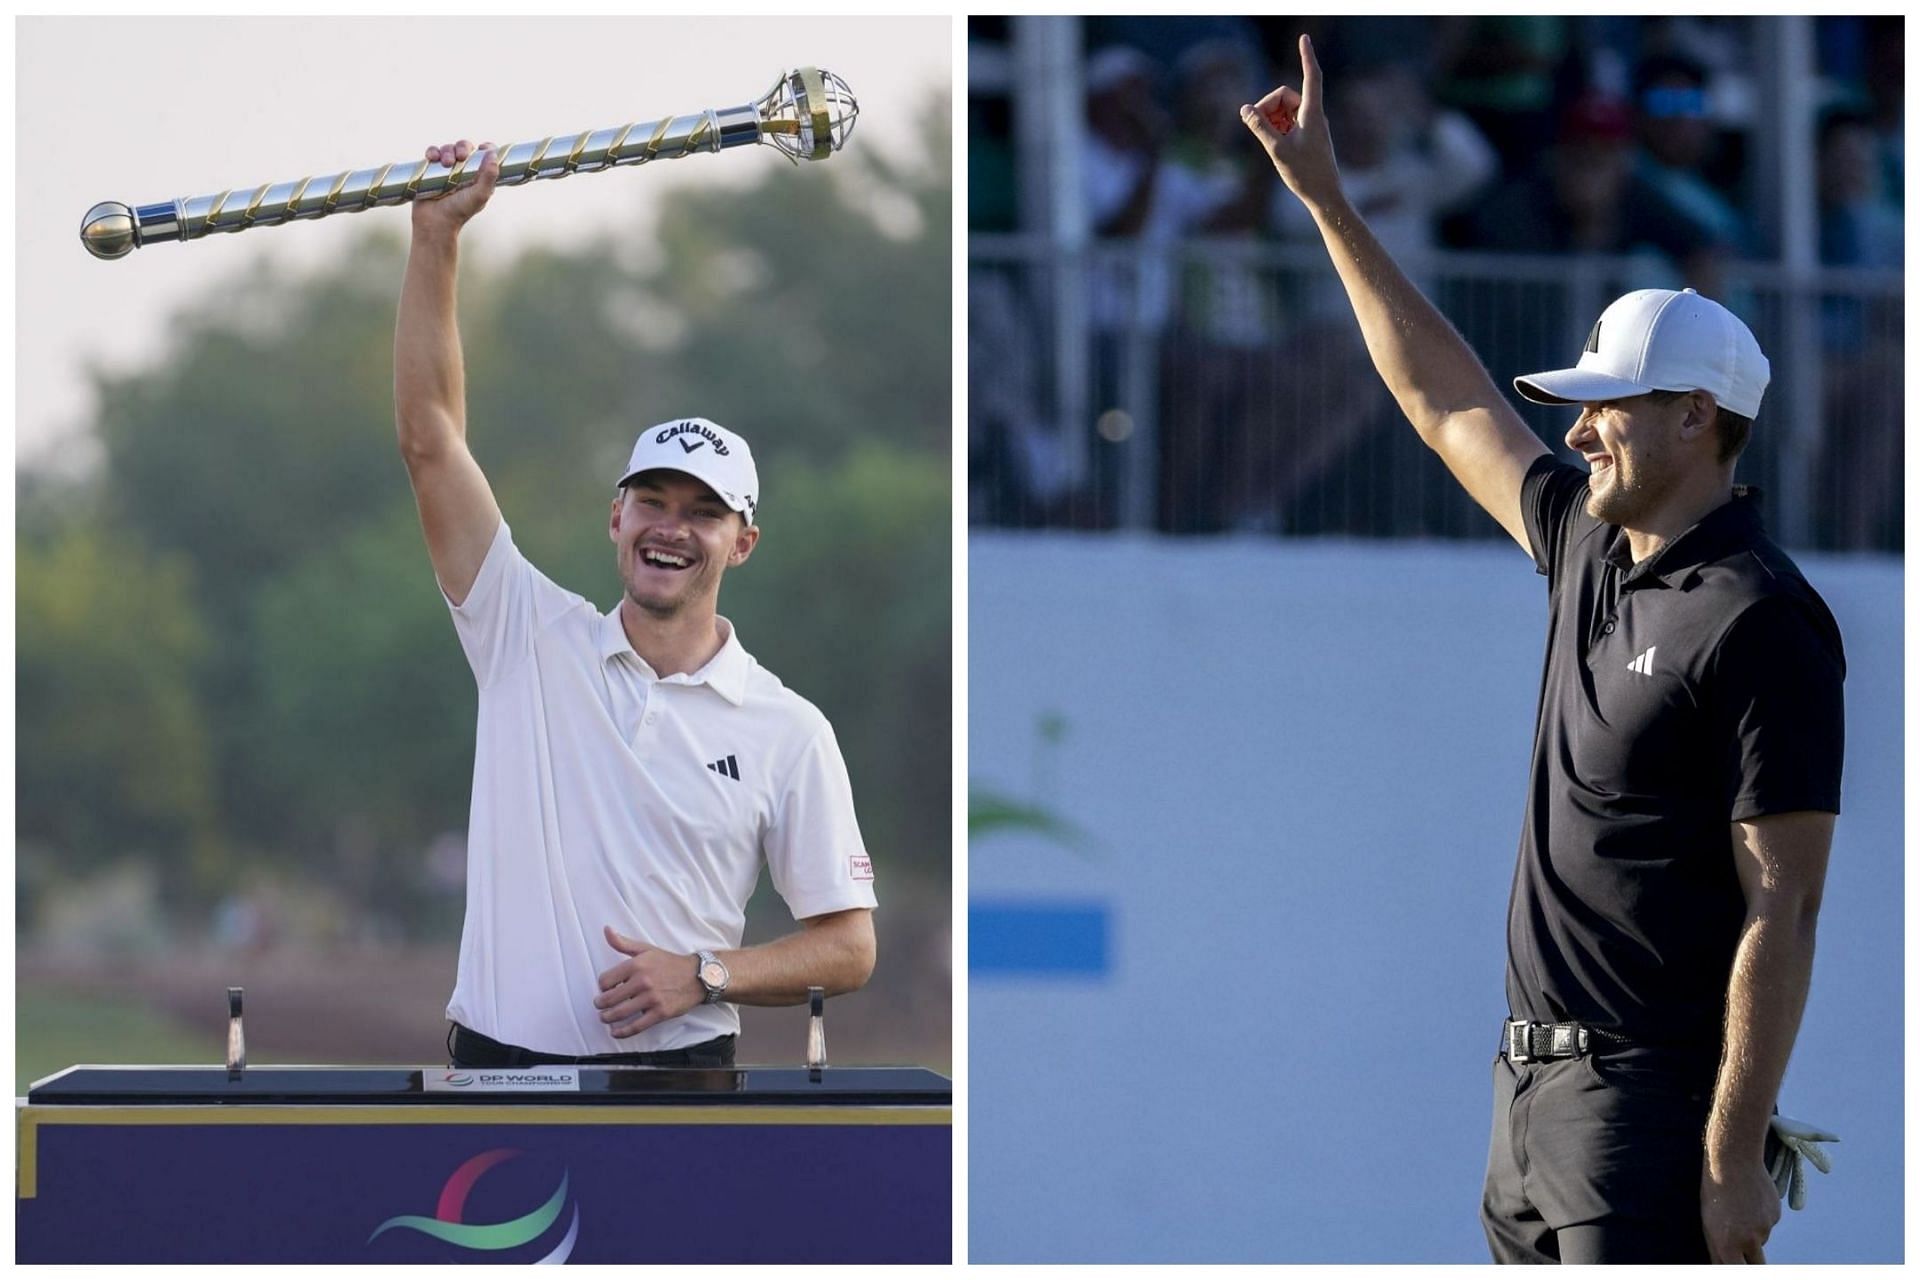 Ludvig Aberg and Nicolaai Hojgaard have earned Masters invite after their respective wins